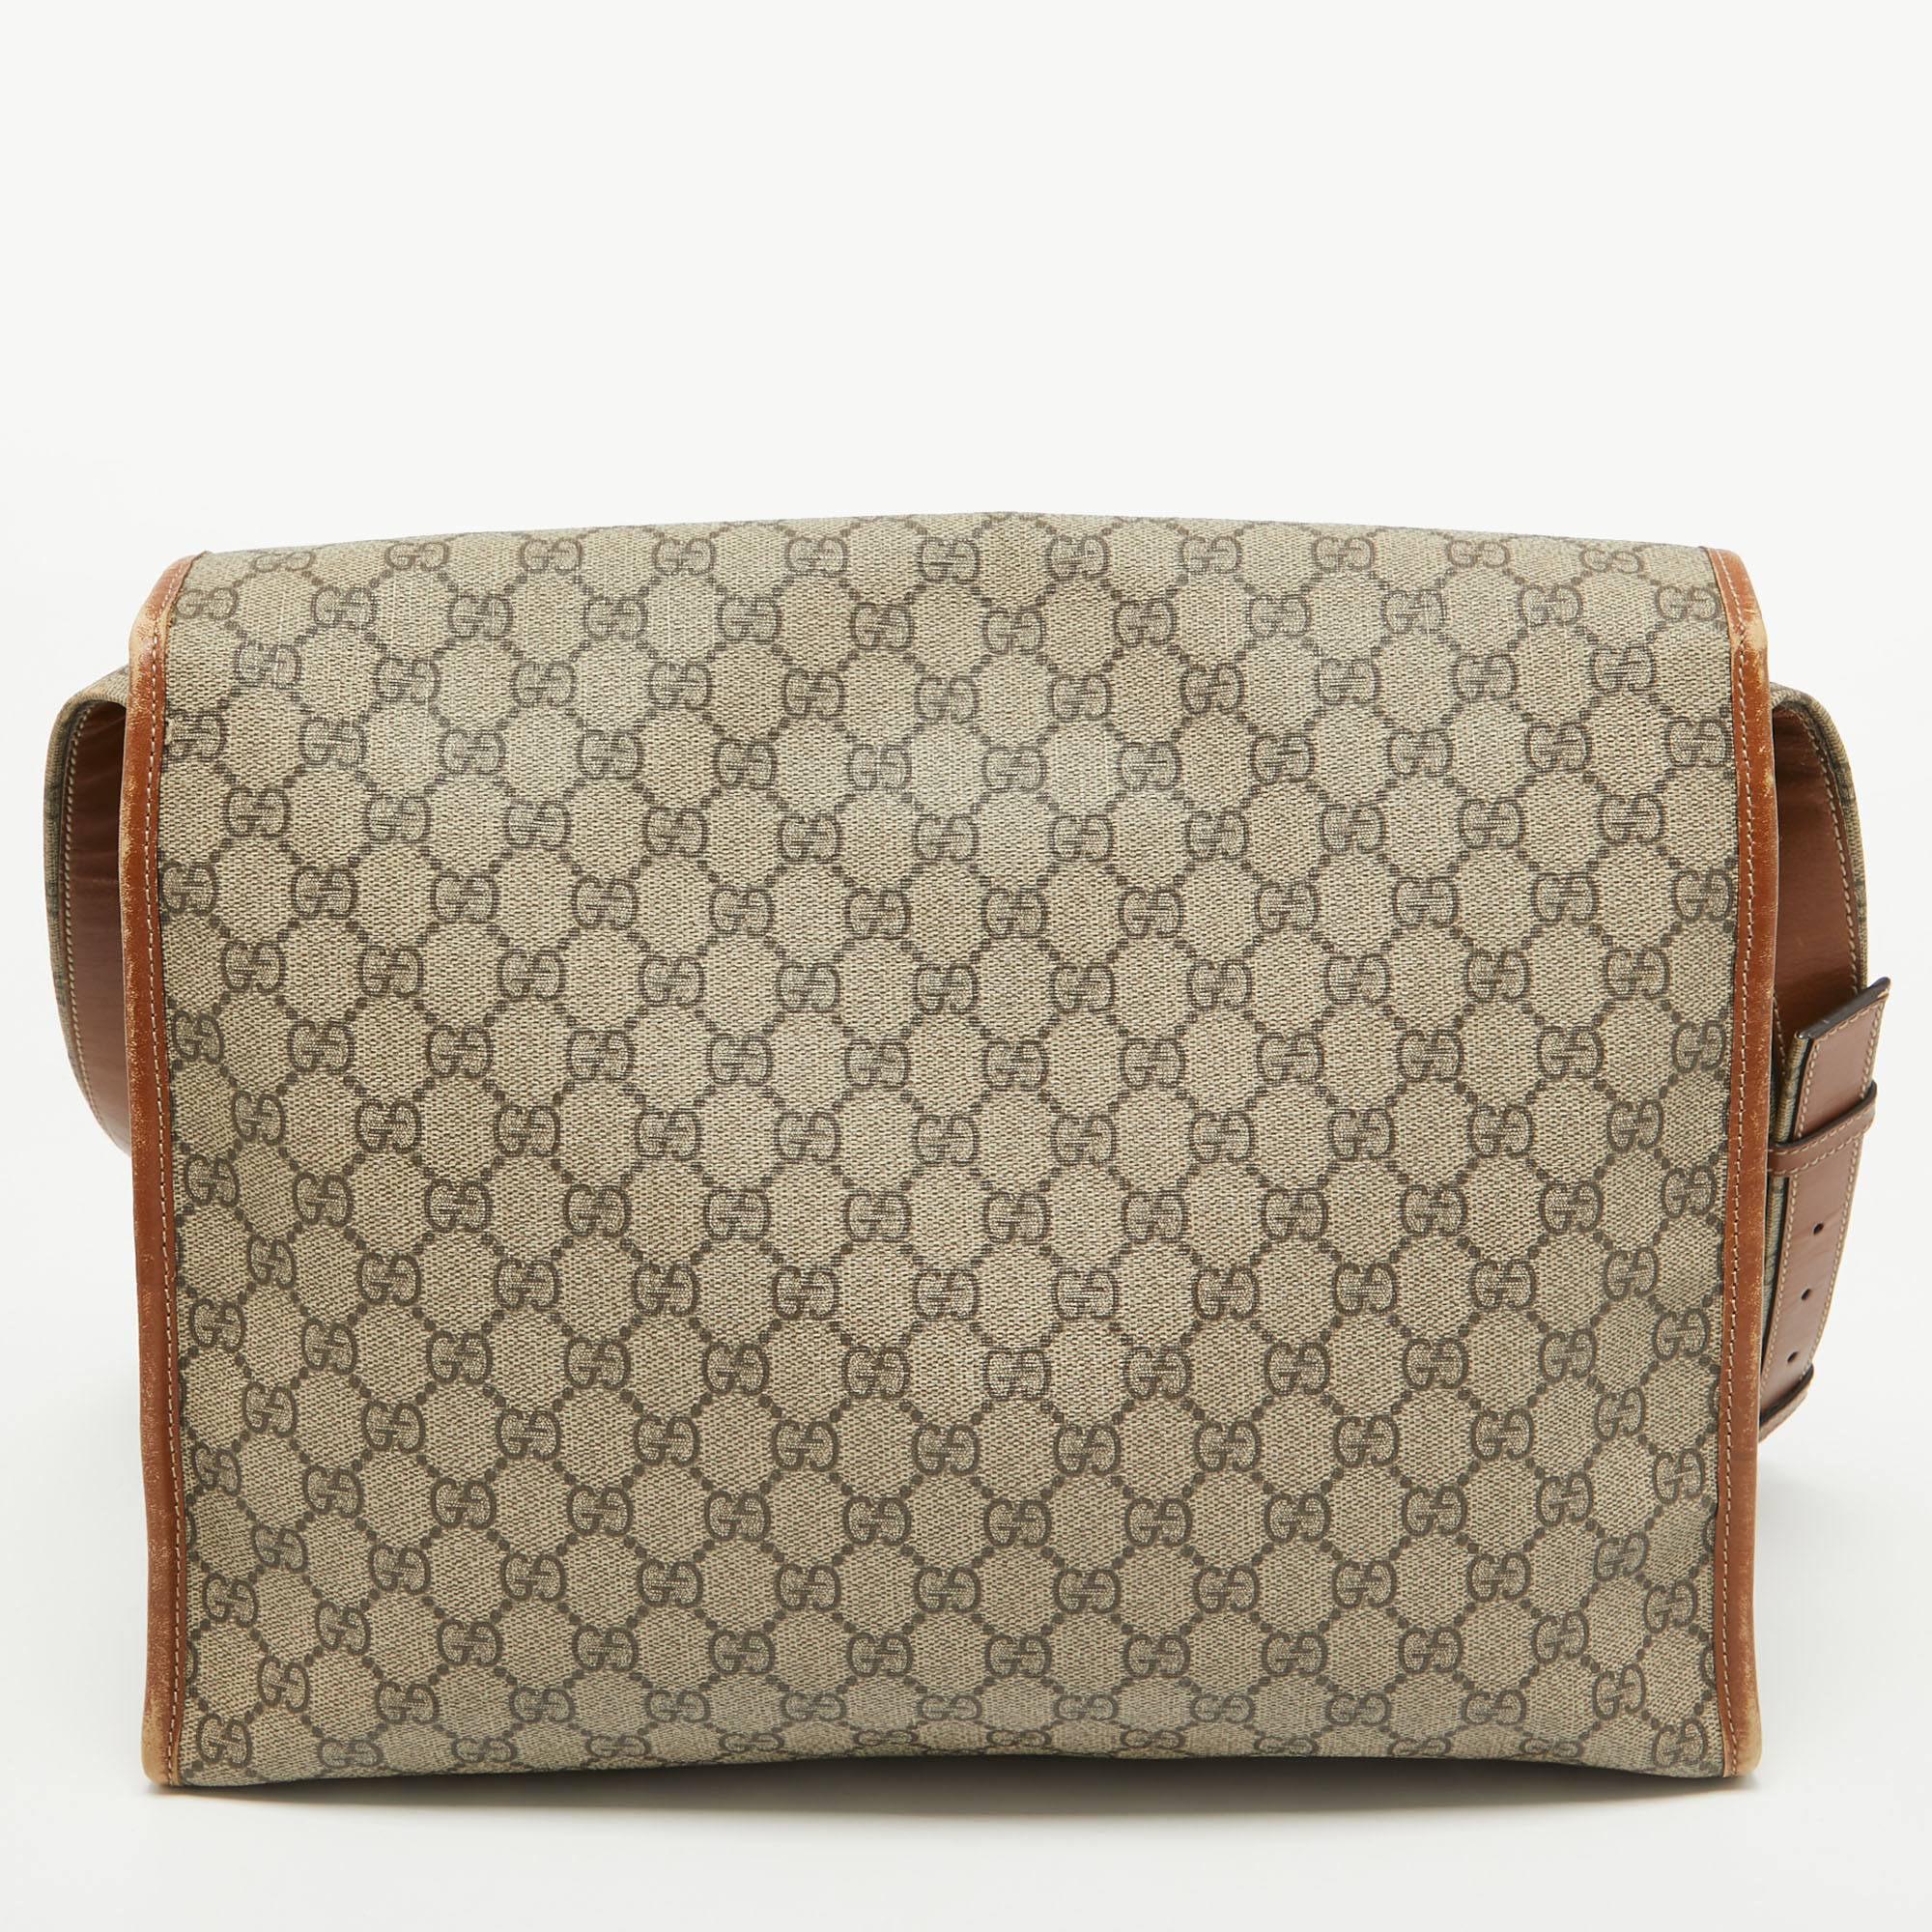 Gucci Beige/Brown GG Supreme Canvas And Leather Messenger Bag